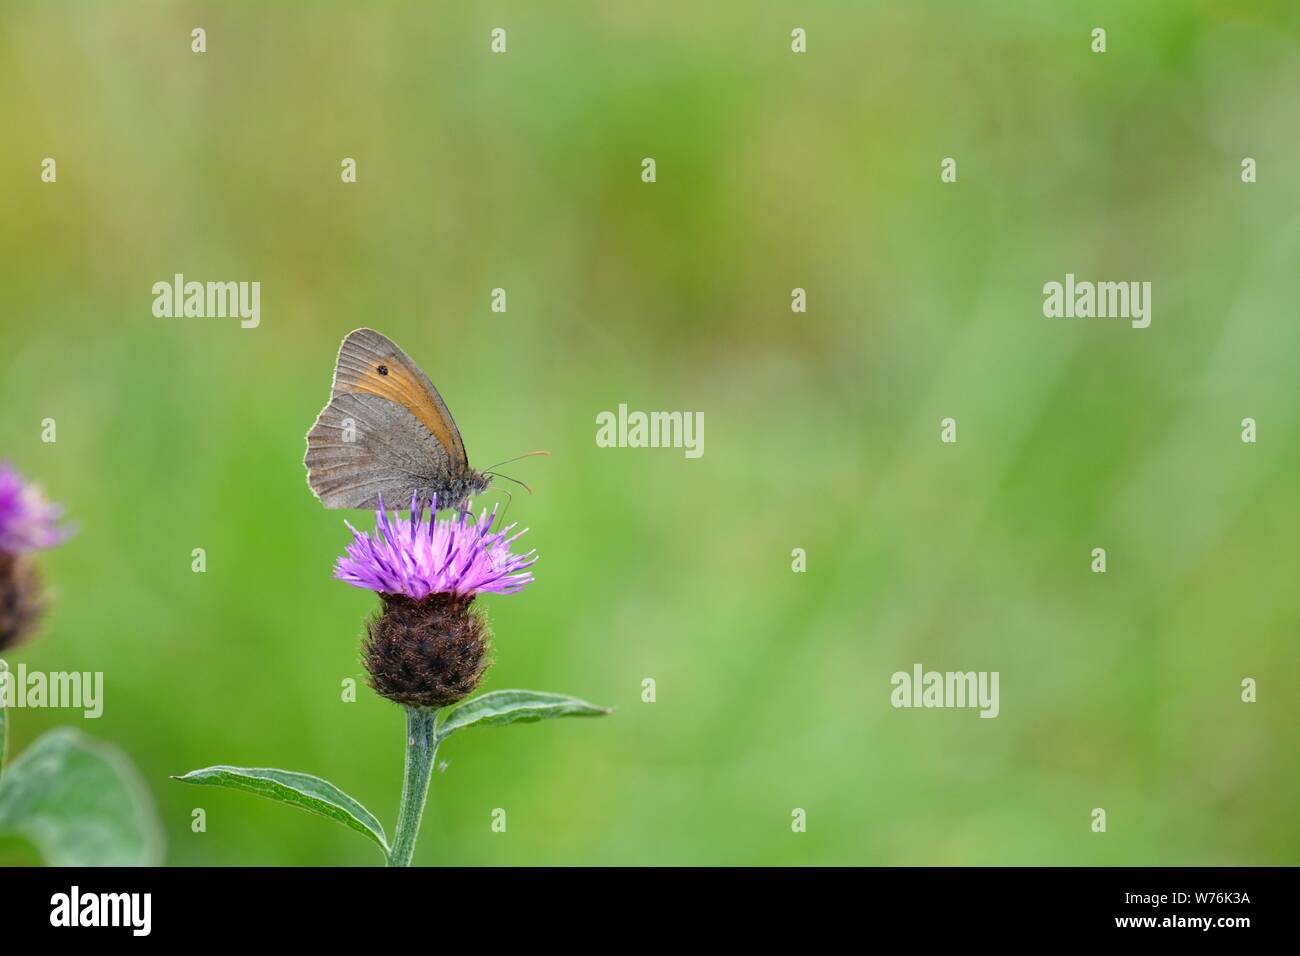 One  little meadow bird   -   Hay-fever   (   Coenonympha pamphilus   )   on purple blossom in front of green nature with copy space Stock Photo